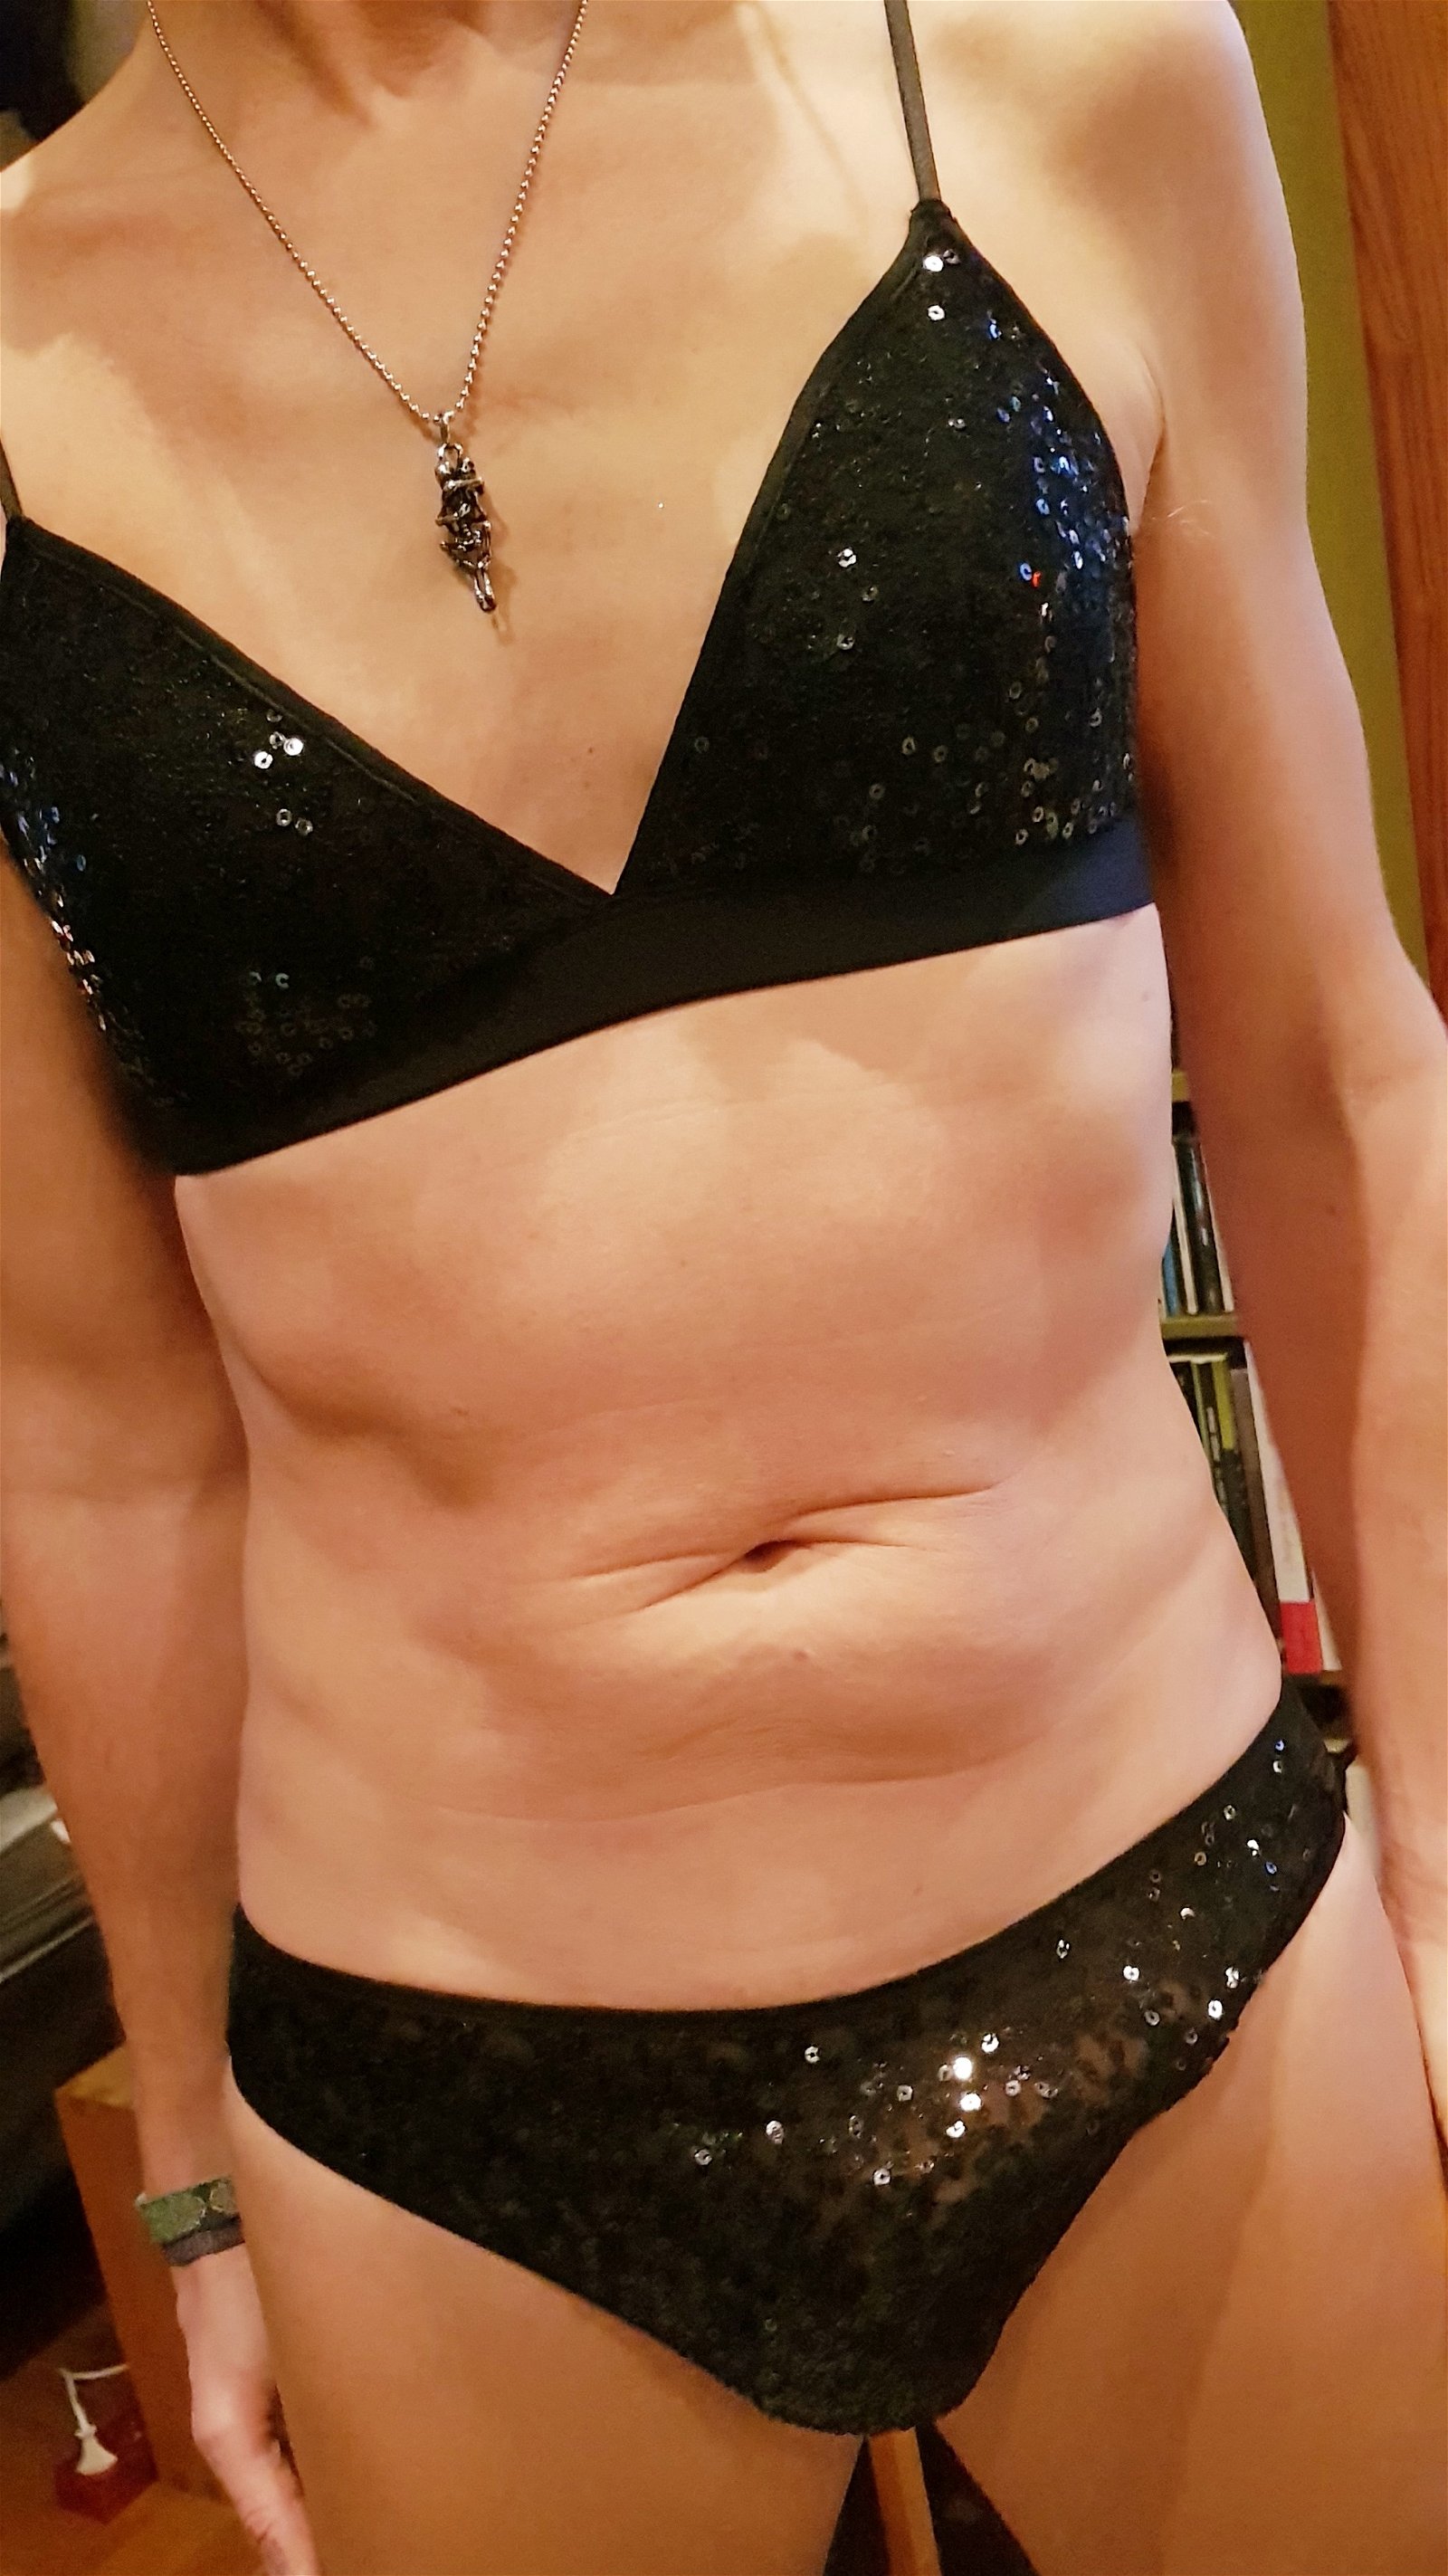 Watch the Photo by Crossdresslingerie with the username @Crossdresslingerie, who is a verified user, posted on March 31, 2019. The post is about the topic Crossdressing lingerie. and the text says 'Glitter lingerie 😊

#crossdress#crossdresser#me#crossdressing#2018#sissy#kinkycouple#wolford#domination#sissy training#kinky couple#male submission#sissified'